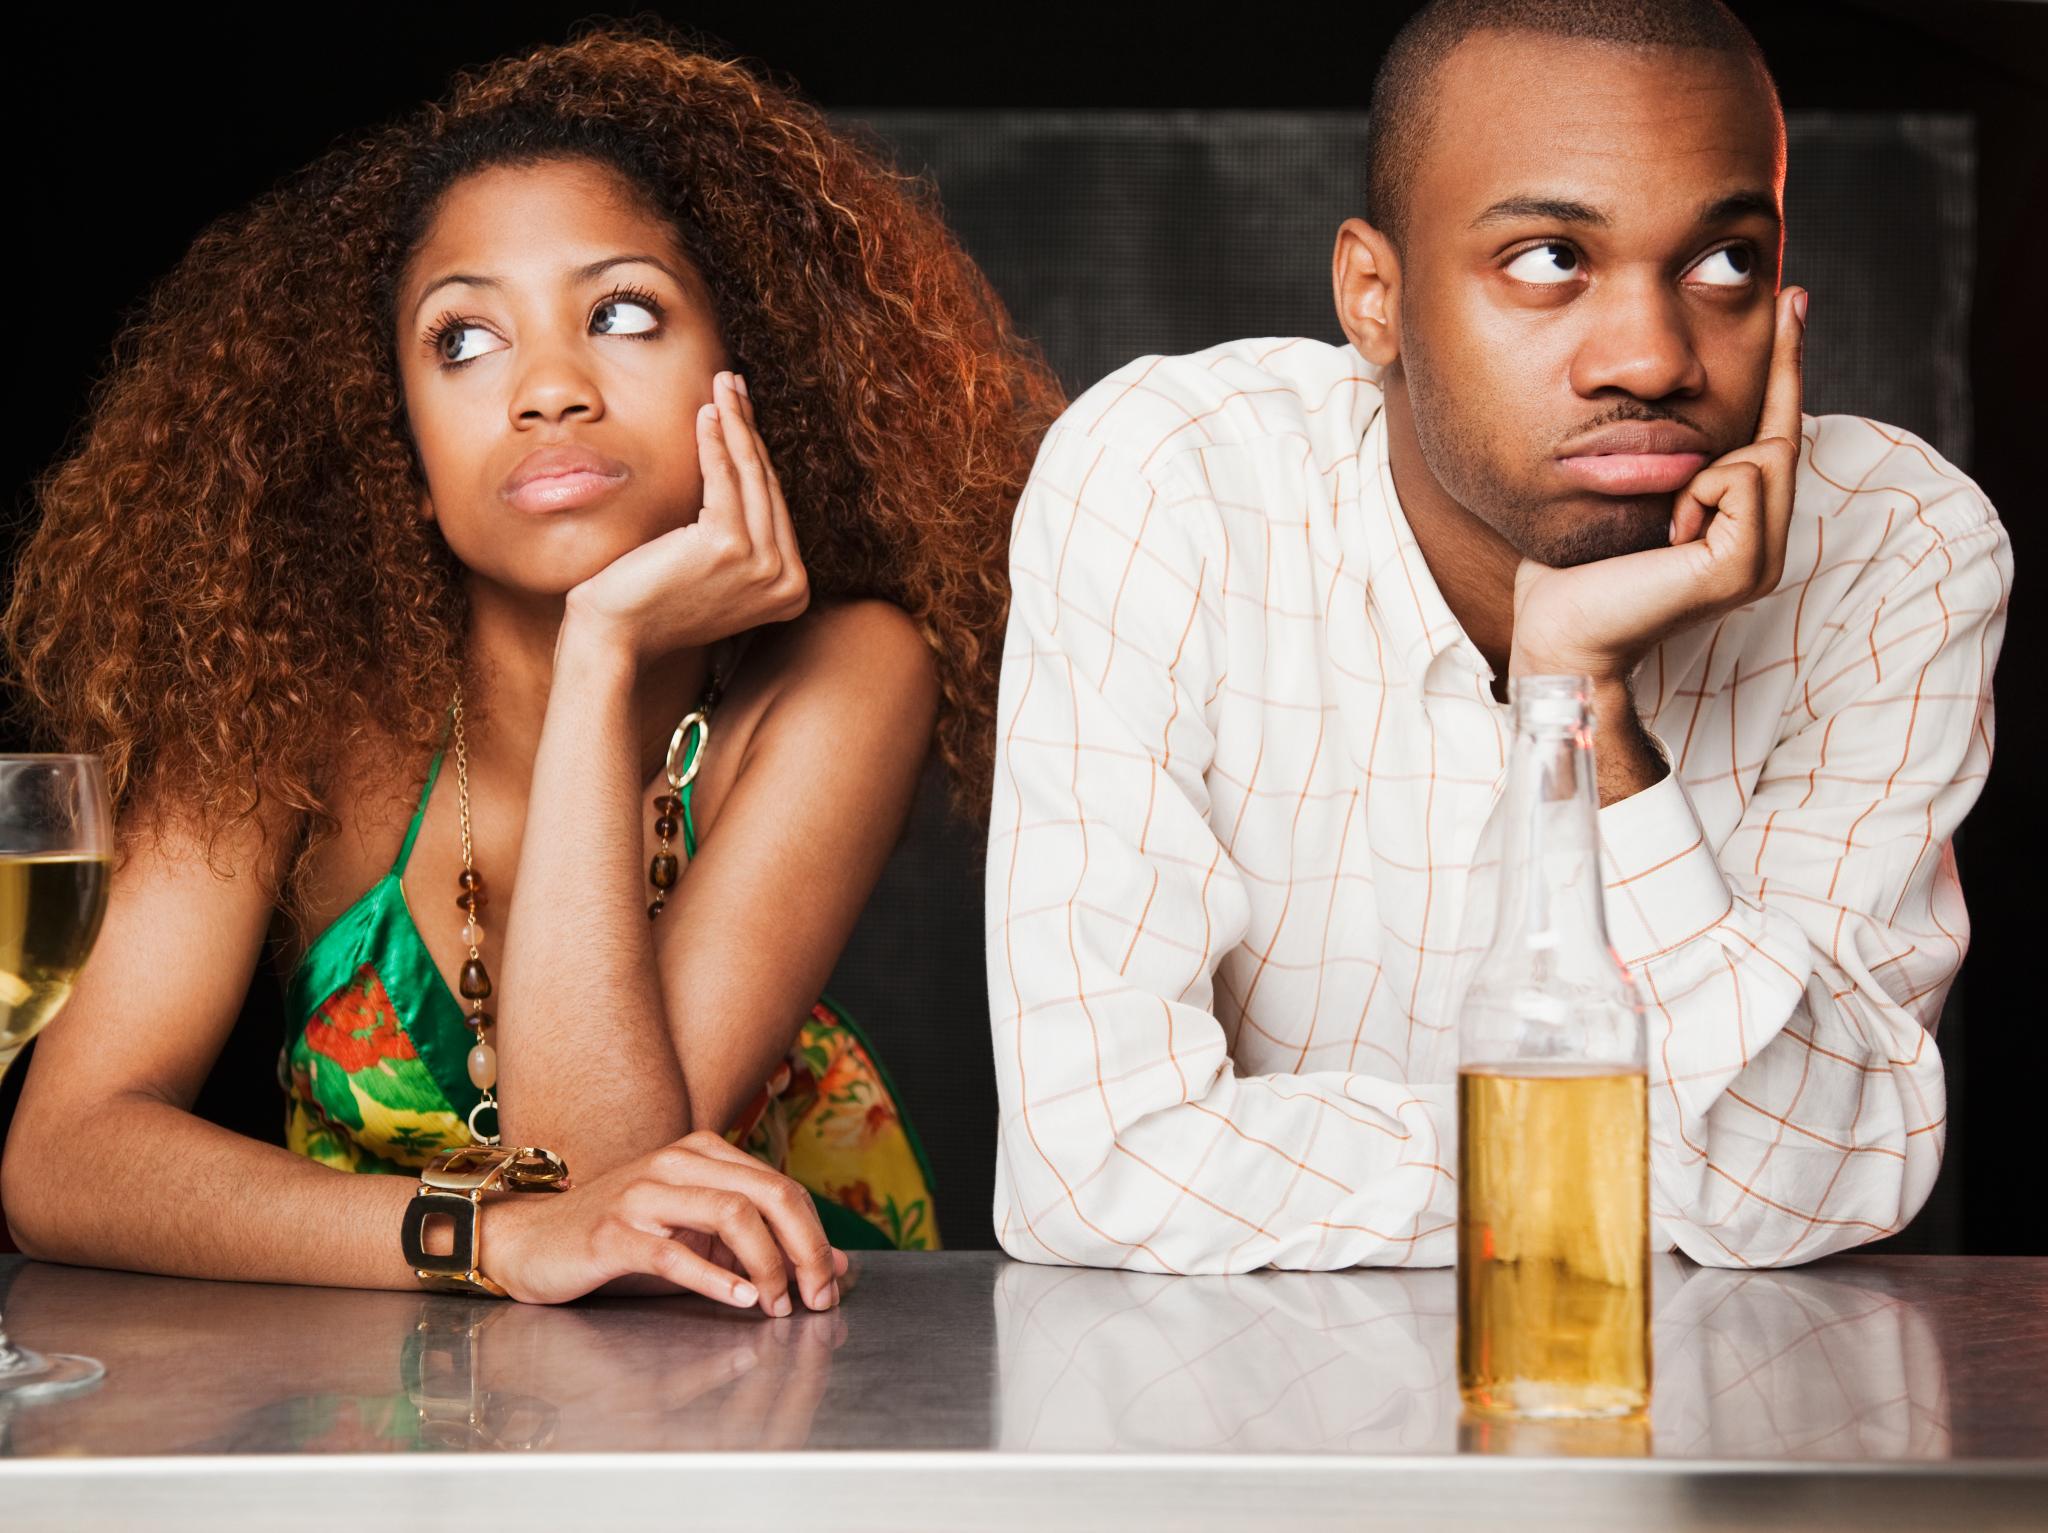 What Do You Do When You Think a Friend Has Made a Questionable Dating Decision?